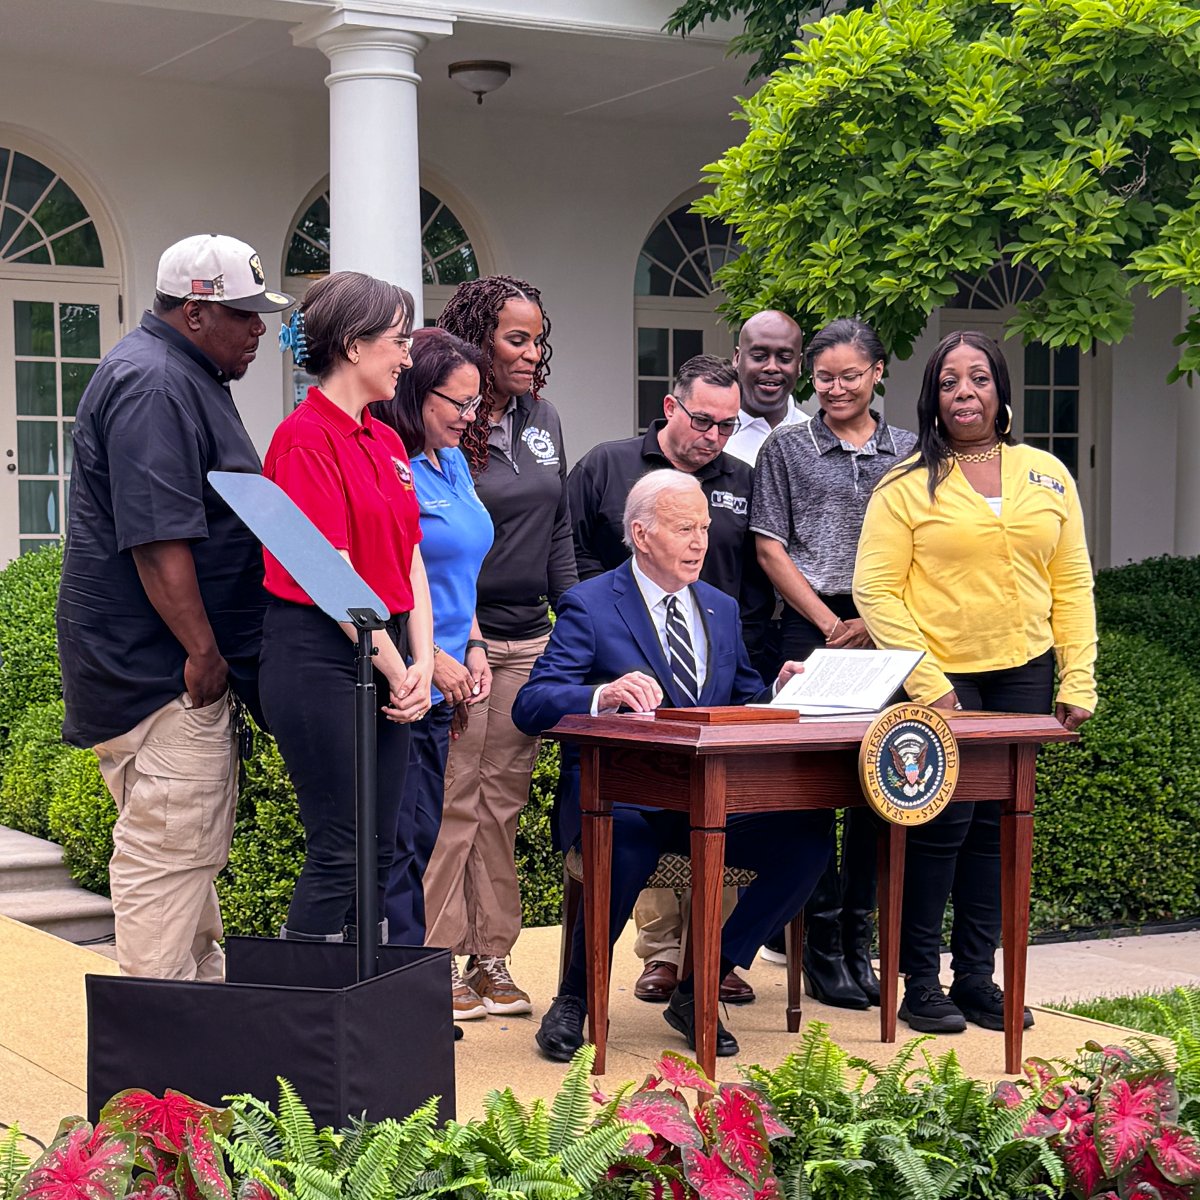 USW members were proud to join @POTUS at the White House today as he announced strengthening and strategically redesigning tariffs on Chinese goods. Read more: usw.org/news/media-cen…